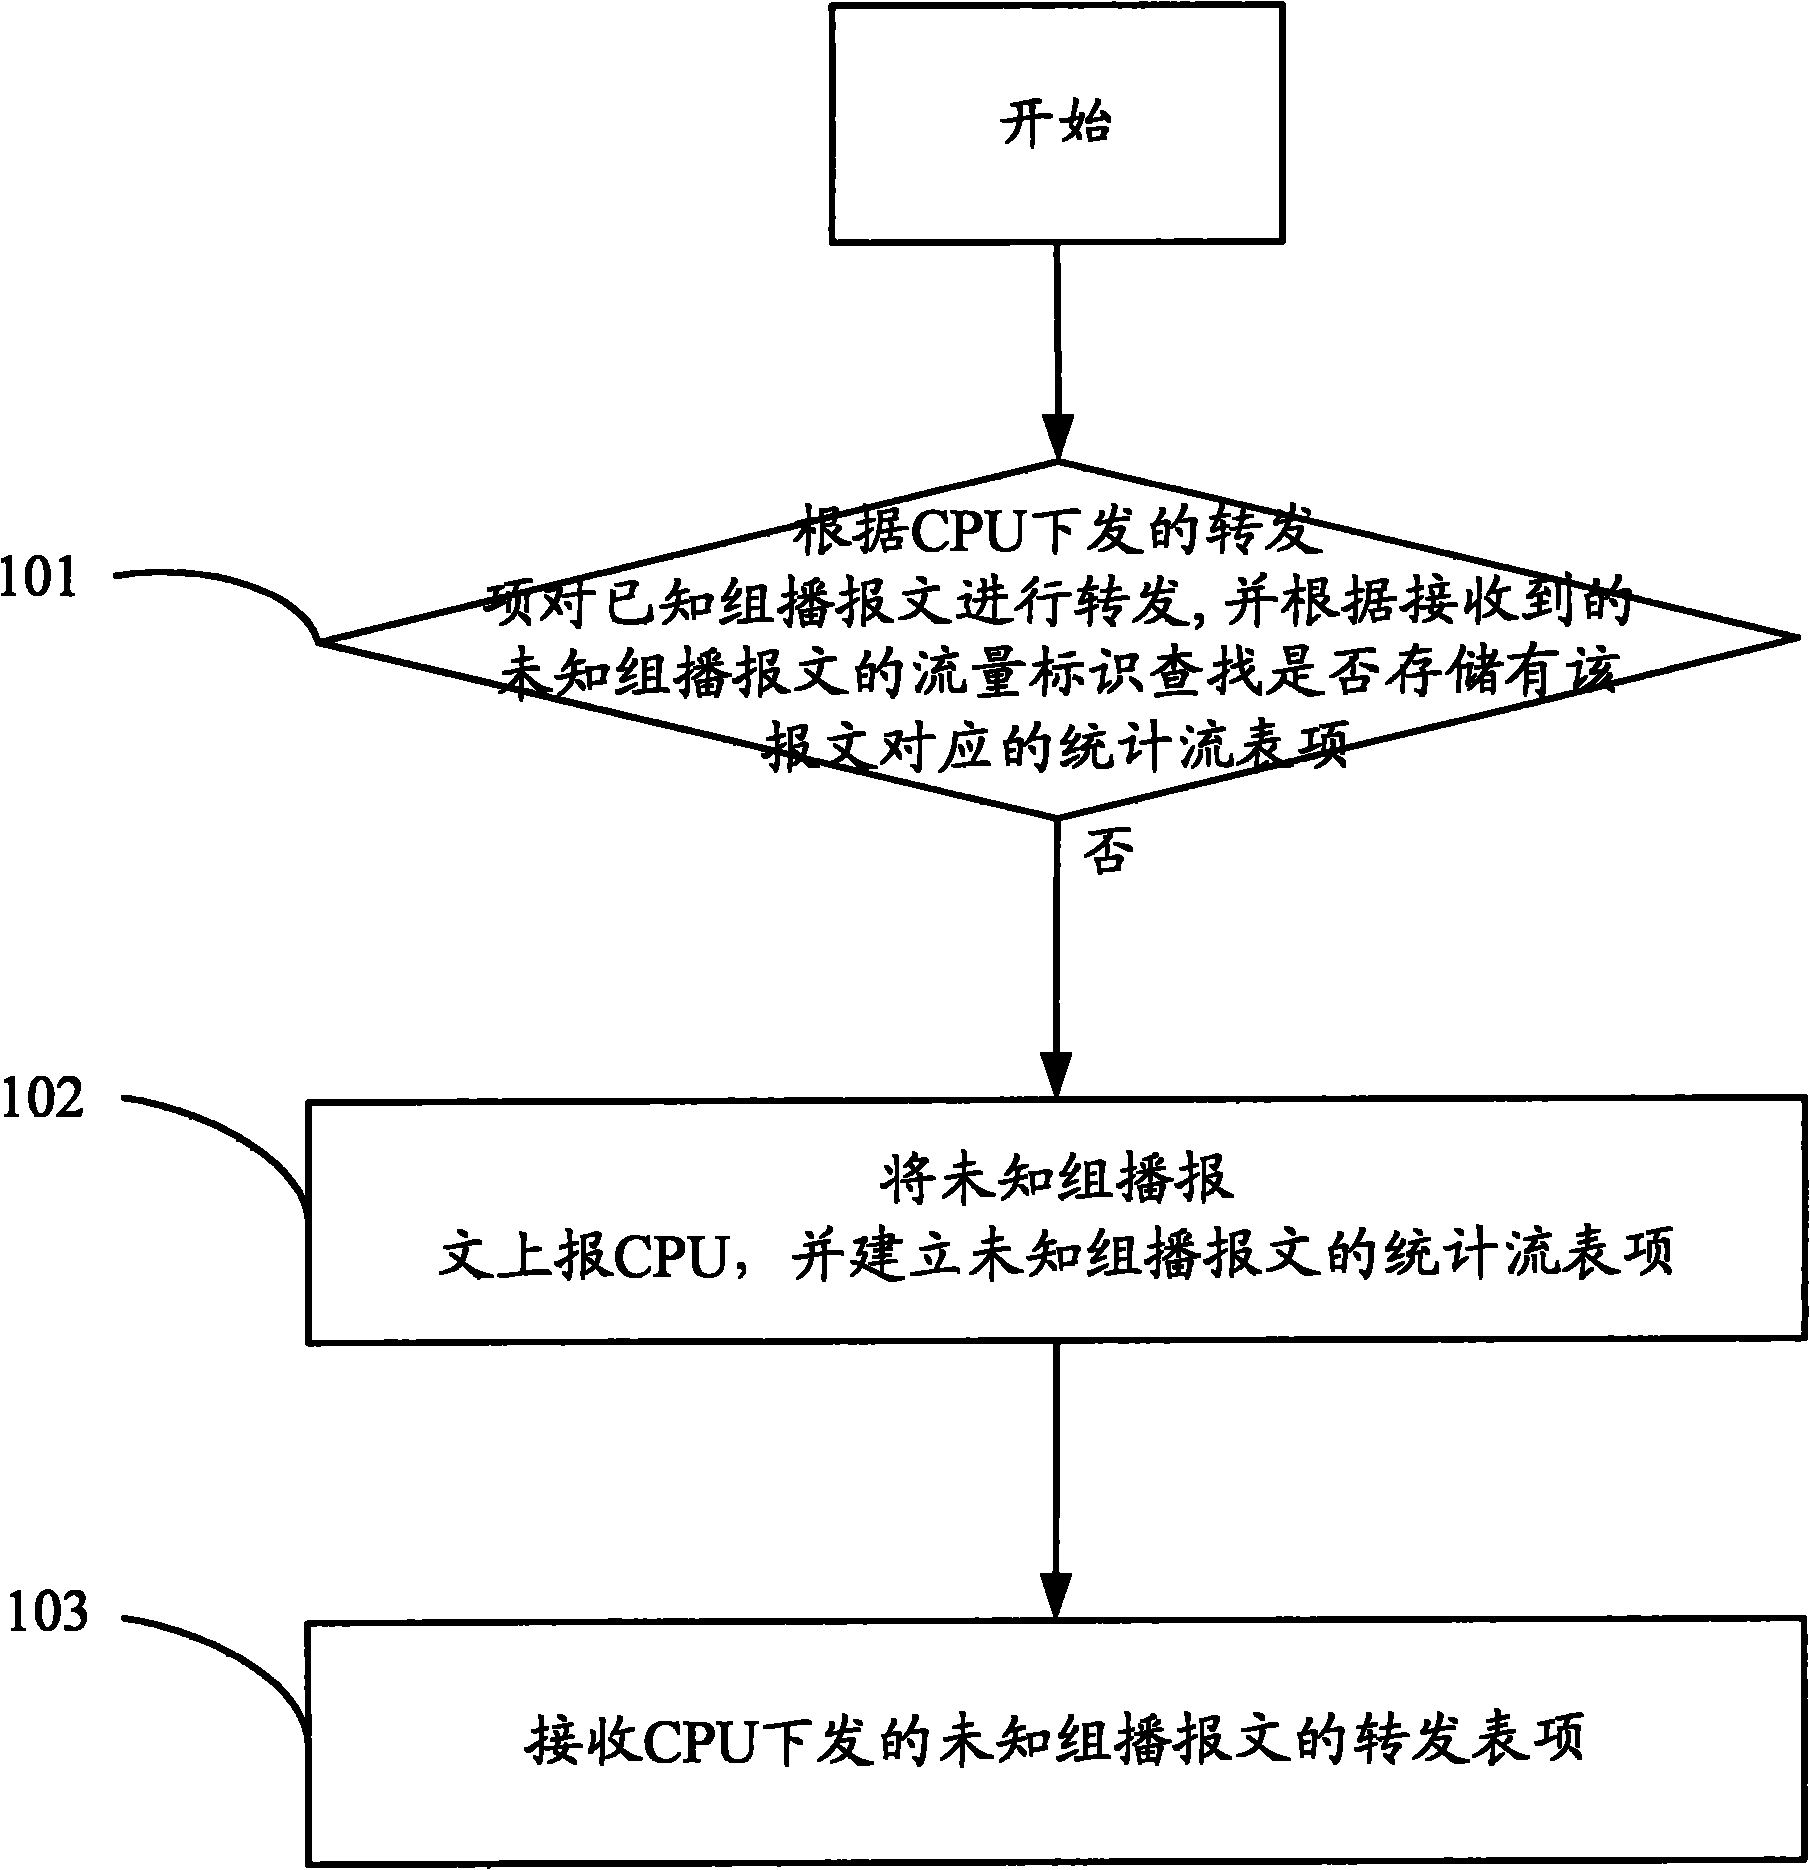 Method and equipment for preventing unknown multicast from attacking CPU (Central Processing Unit)